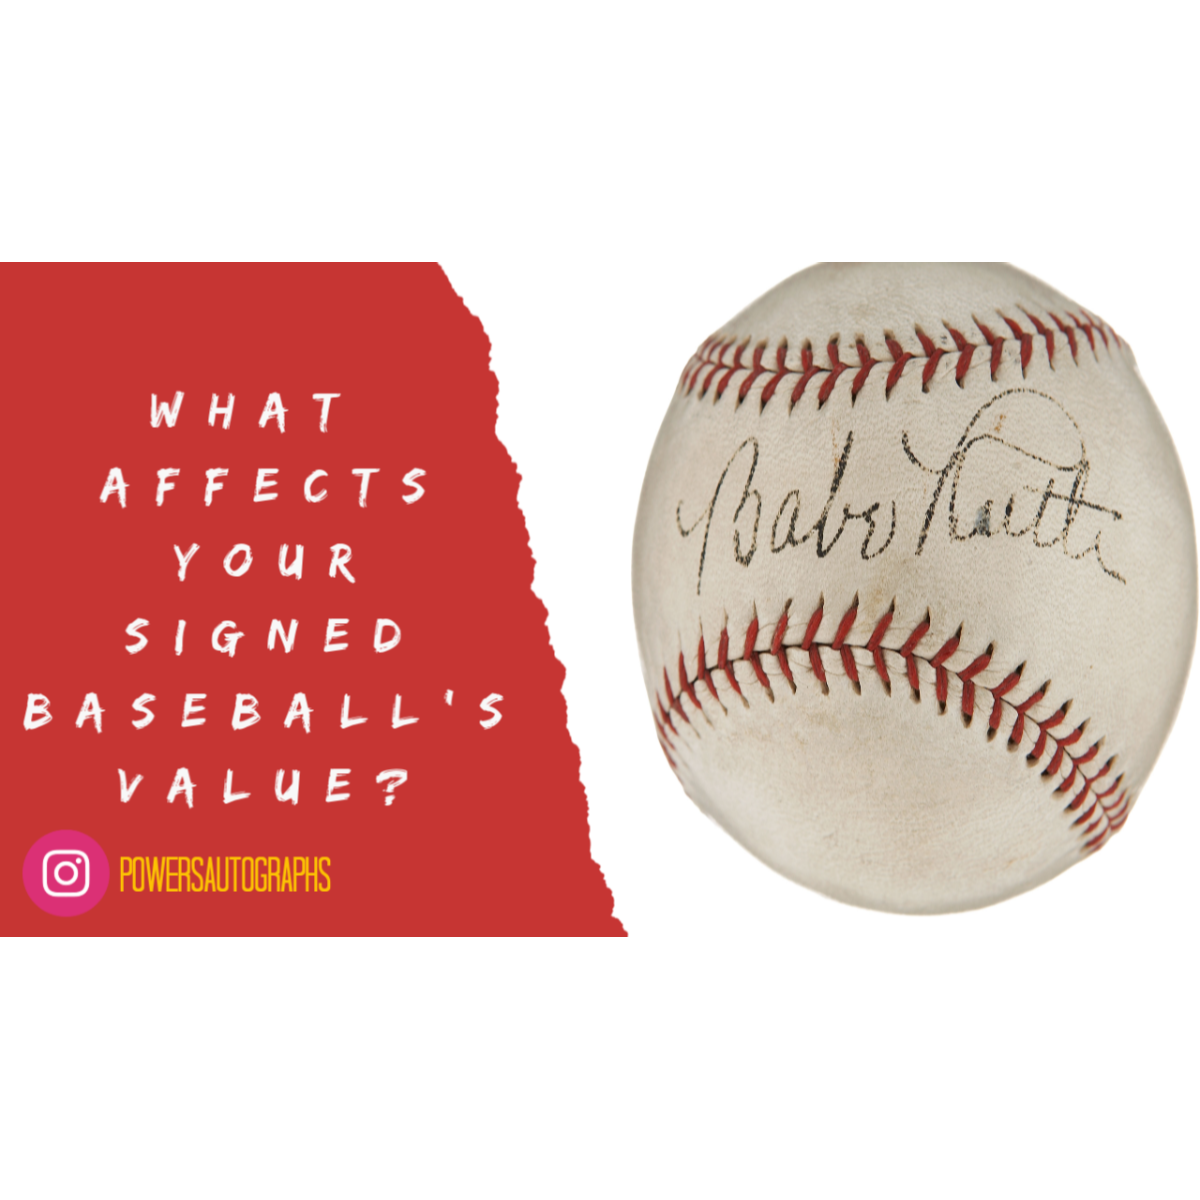 5 Things That Affect an Autographed Baseball's Value